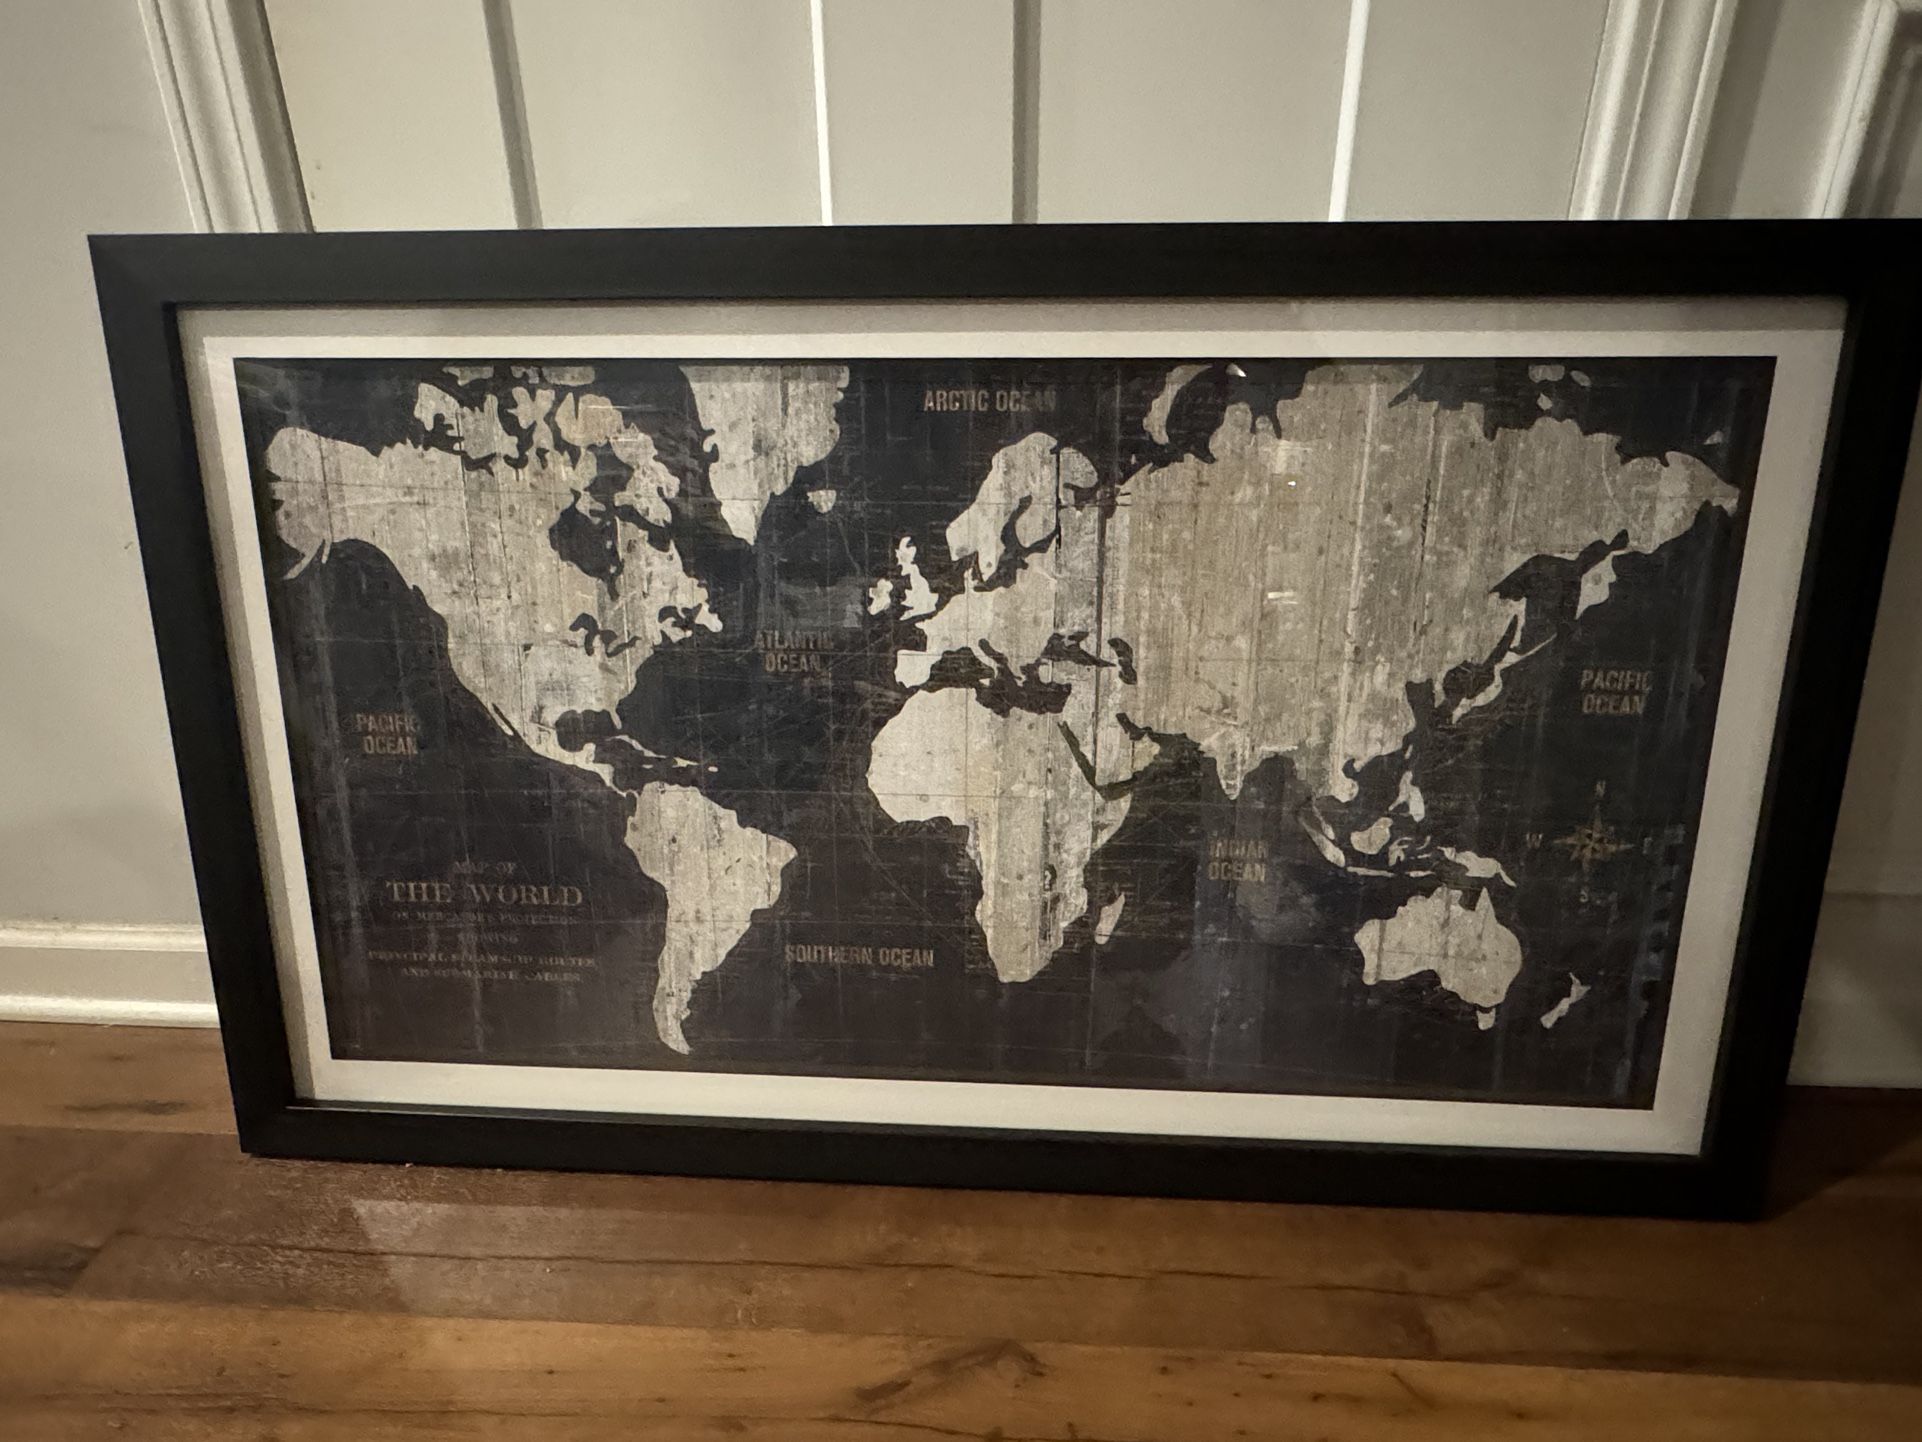 WORLD MAP FRAMED 44 INCHES BY 26 INCHES